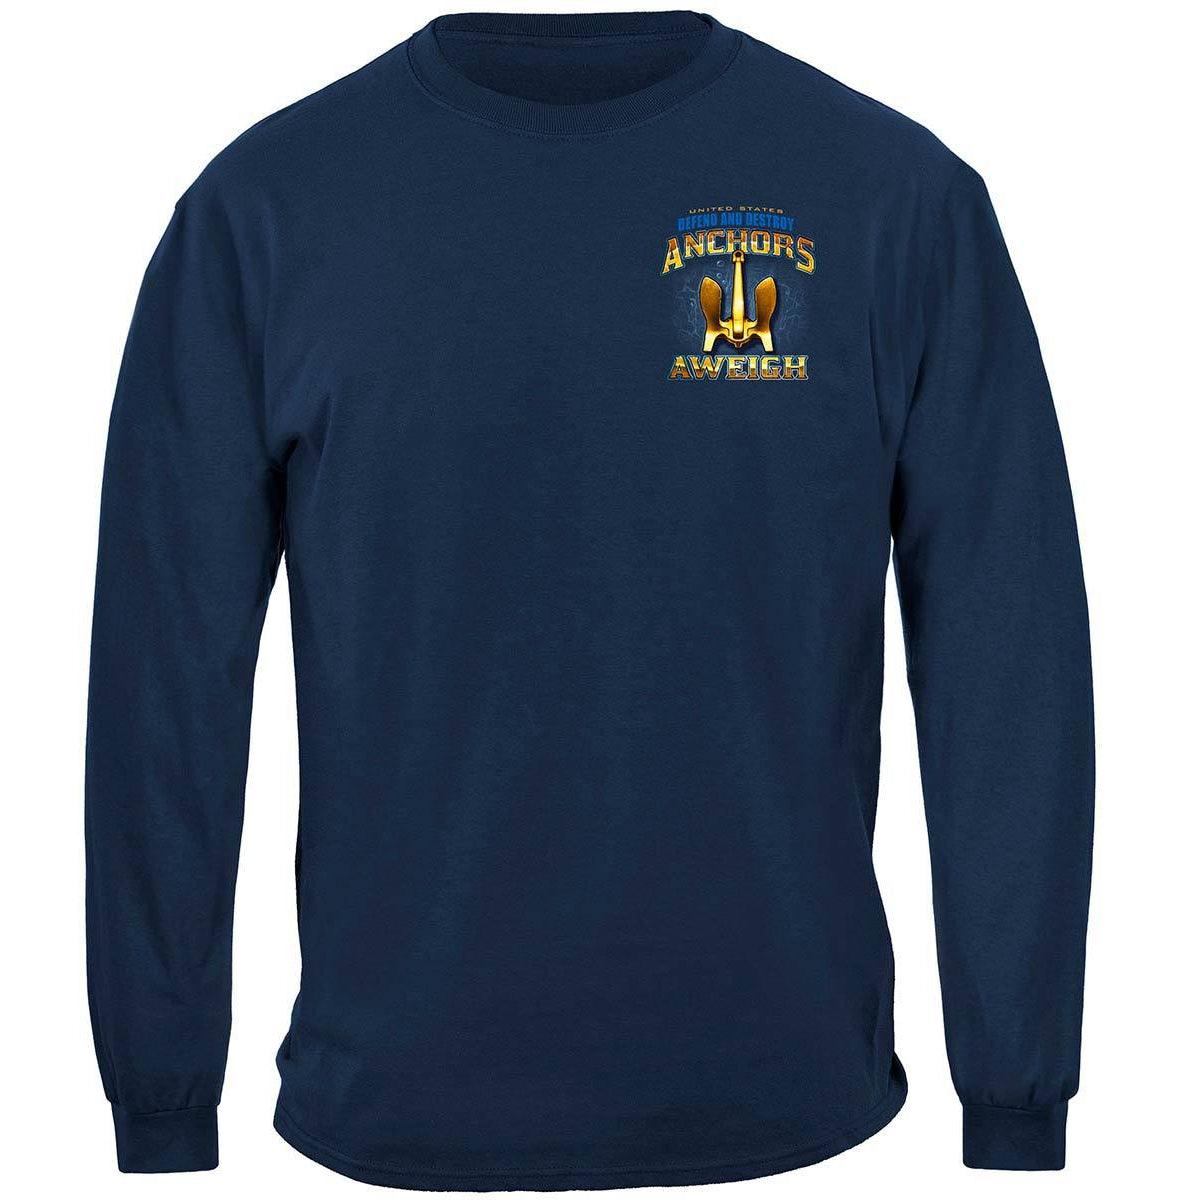 US NAVY Anchors Aweigh Defend And Destroy Premium Long Sleeve - Military Republic